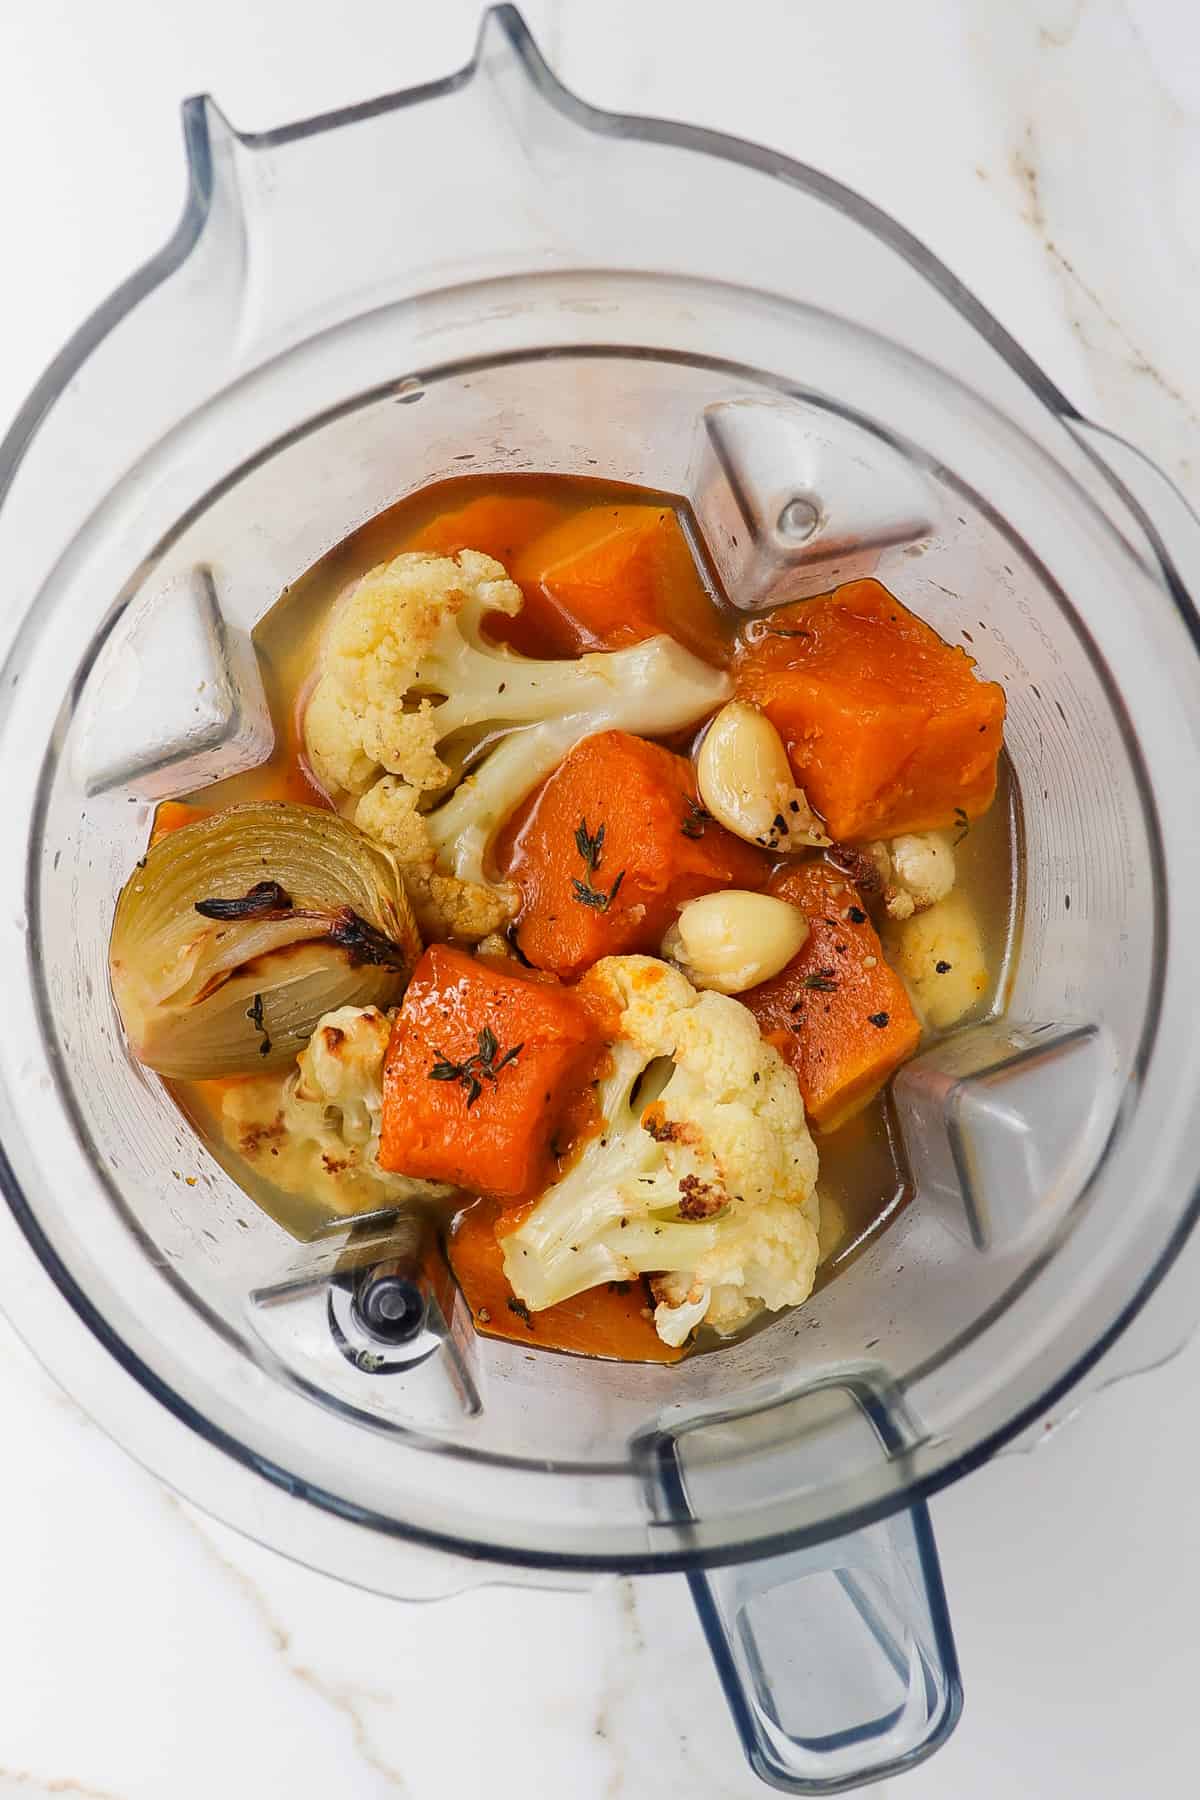 Roasted vegetables in a blender jug with thyme leaves and vegetable stock.